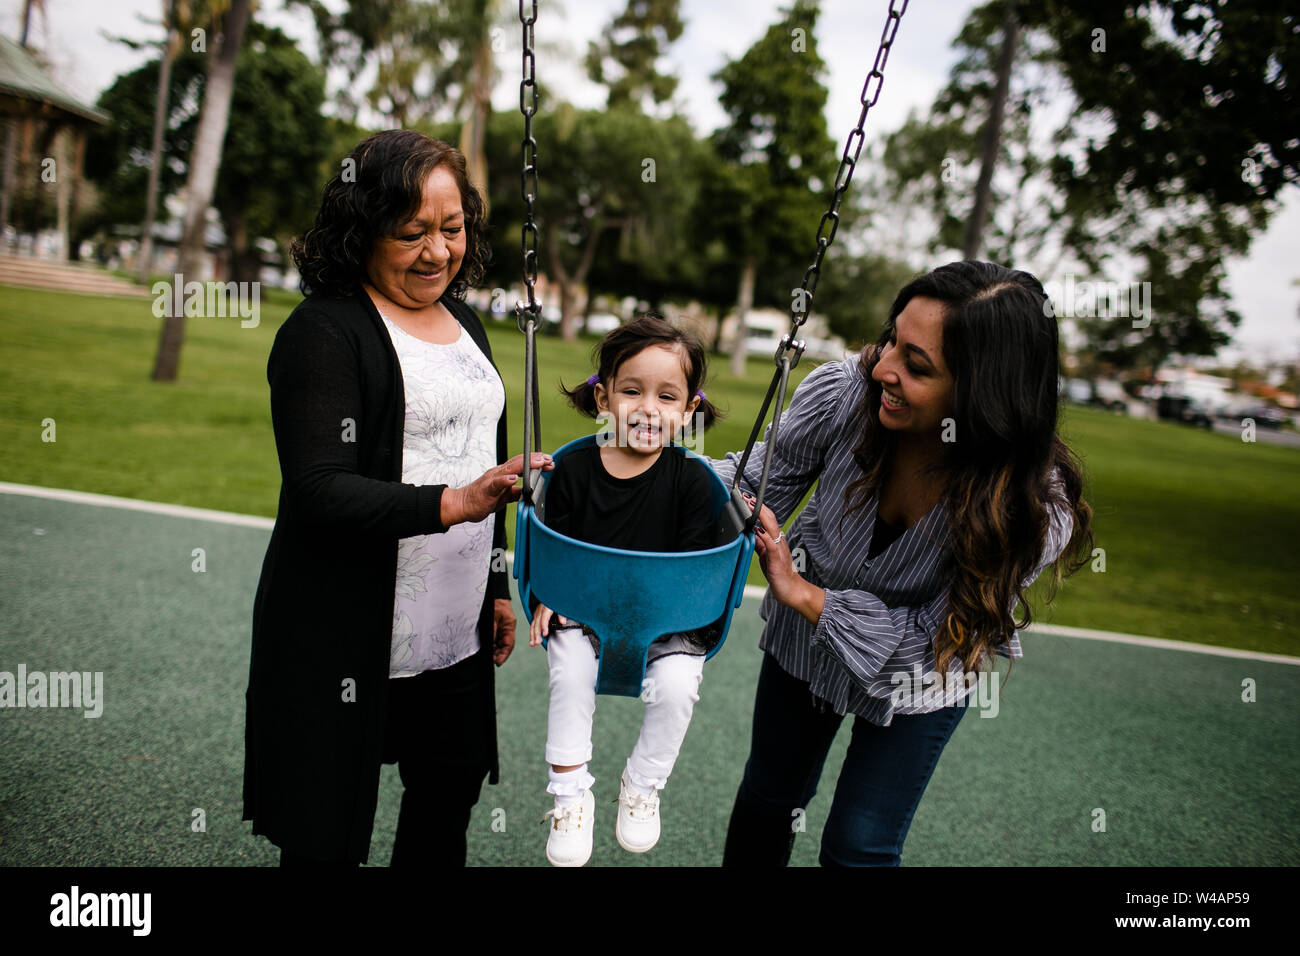 Grandmother and mother pushing little girl laughing in swing Stock Photo